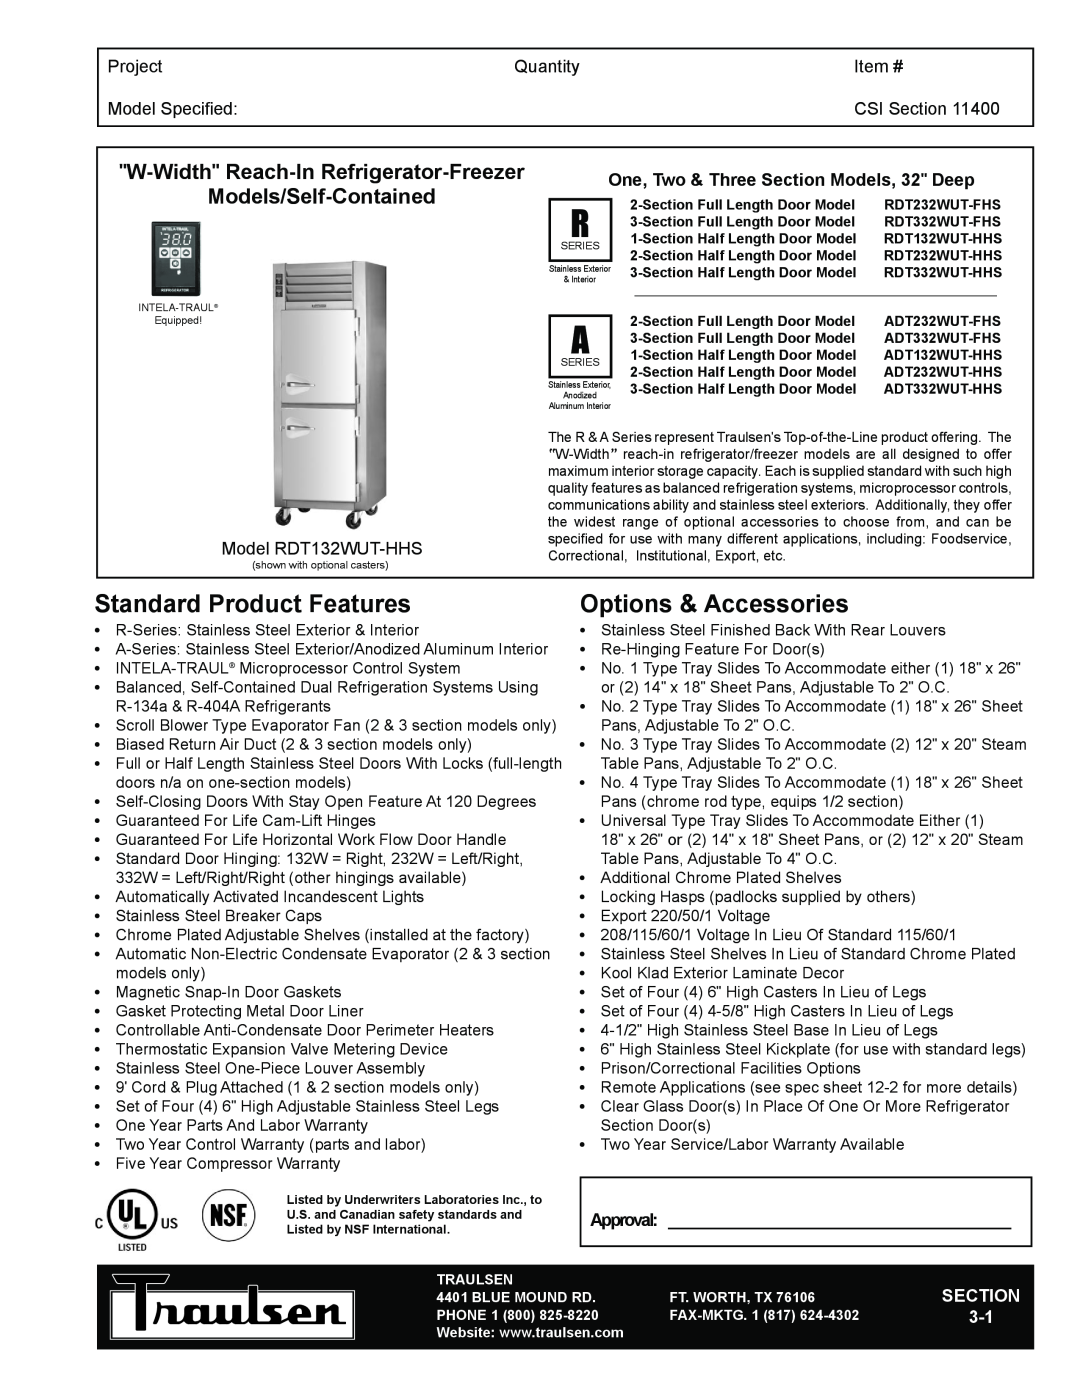 Traulsen RDT132WUT-HHS warranty W-Width Reach-In Refrigerator-Freezer, Models/Self-Contained, Project, Quantity, Item # 